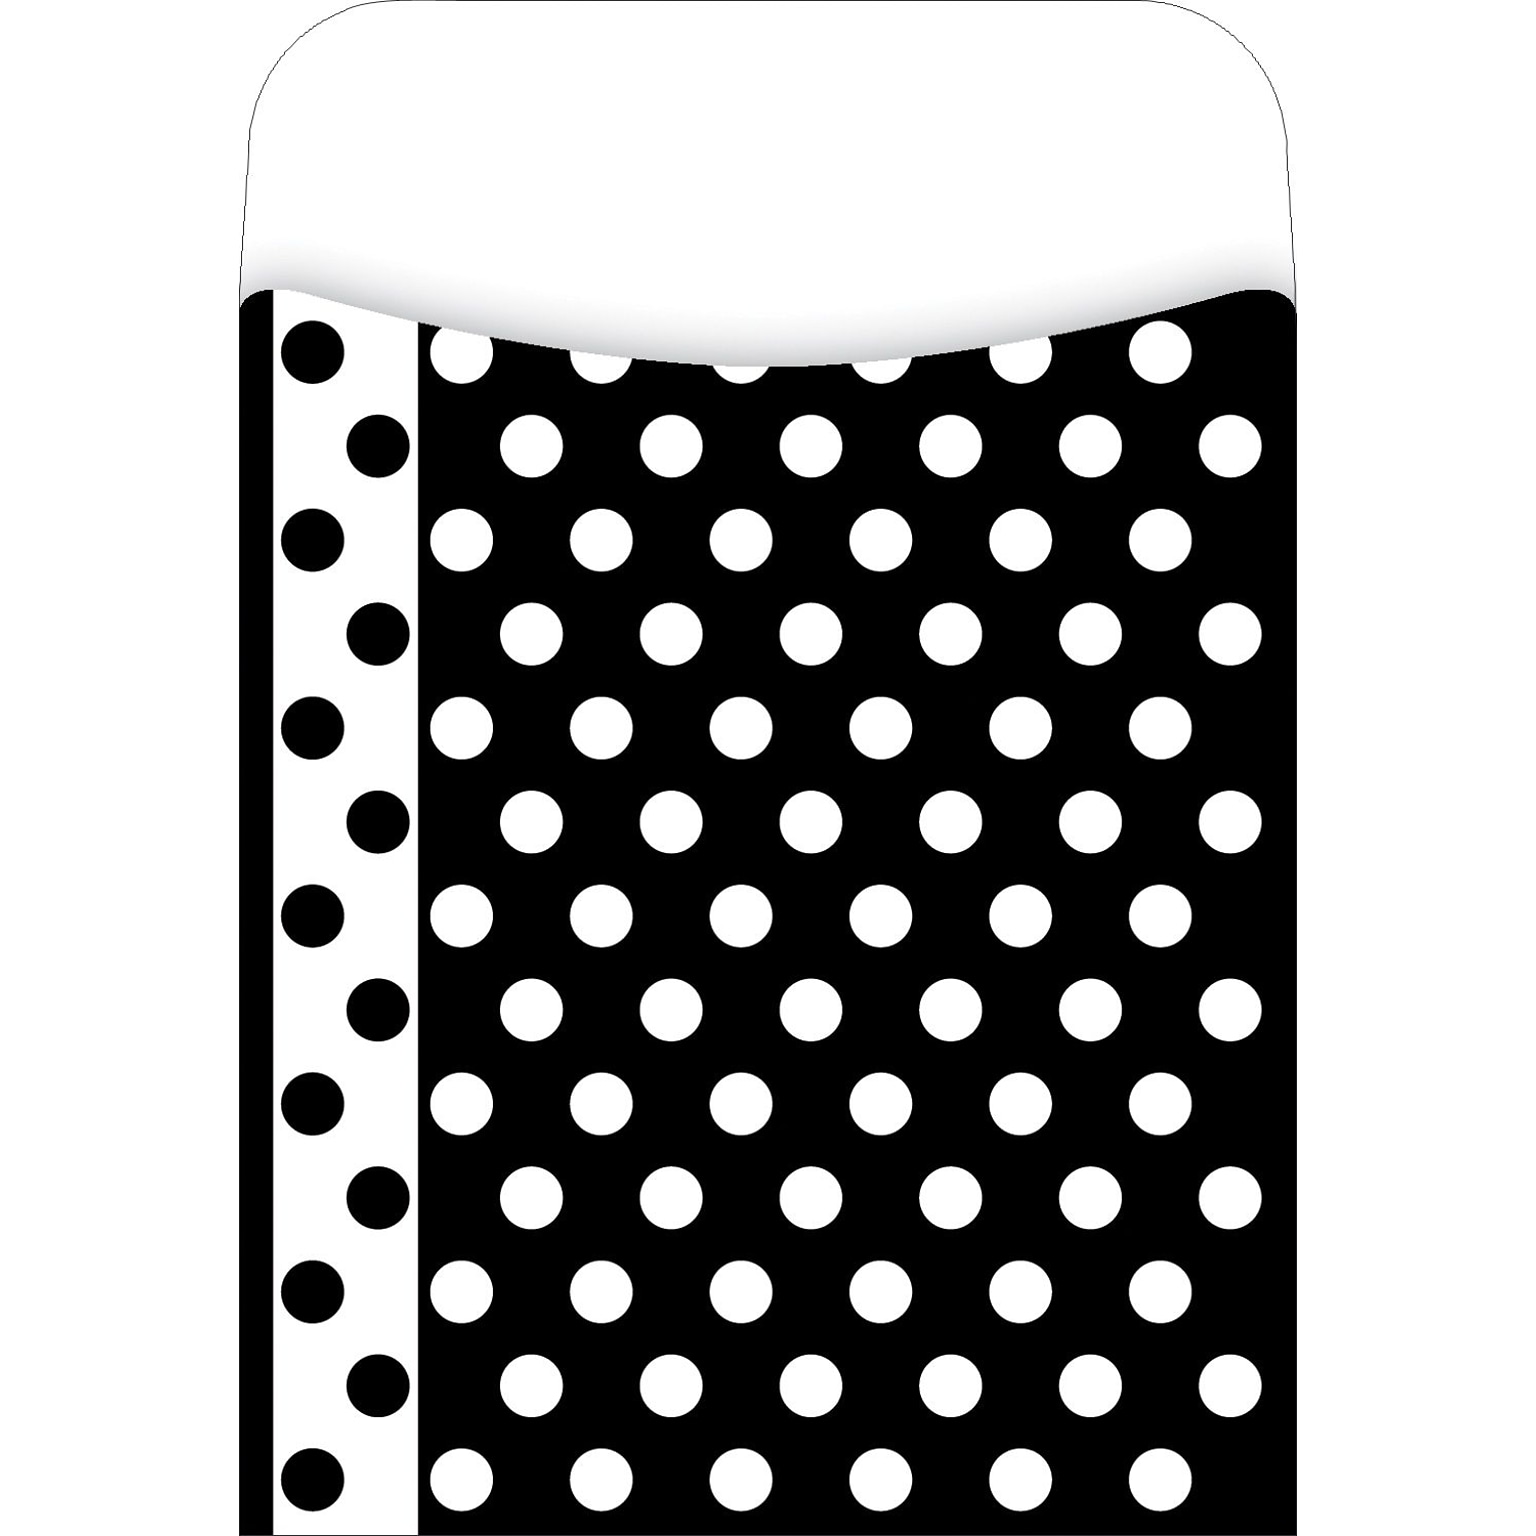 Barker Creek Peel and Stick Library Pocket, Black and White Dots Design, 30/Pack